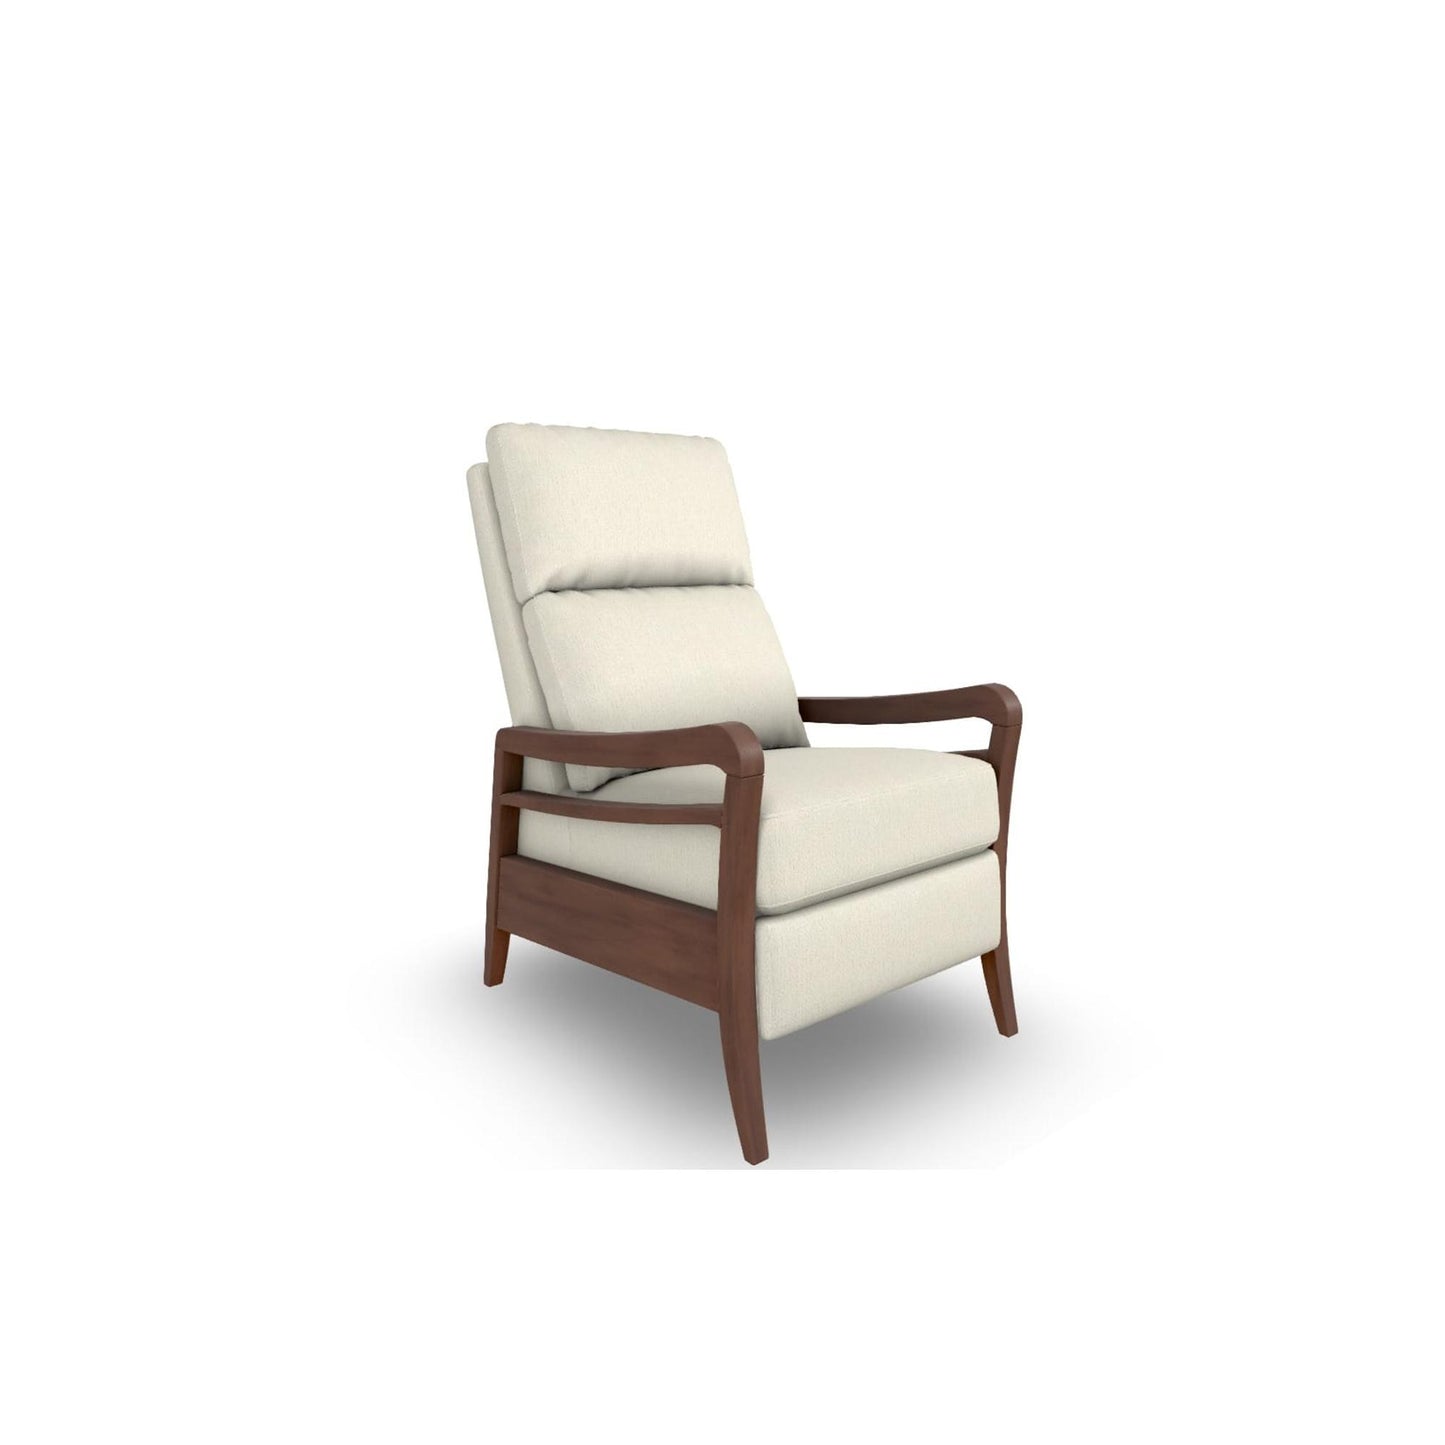 Ryberson Three-Way Recliner in Cotton Fabric